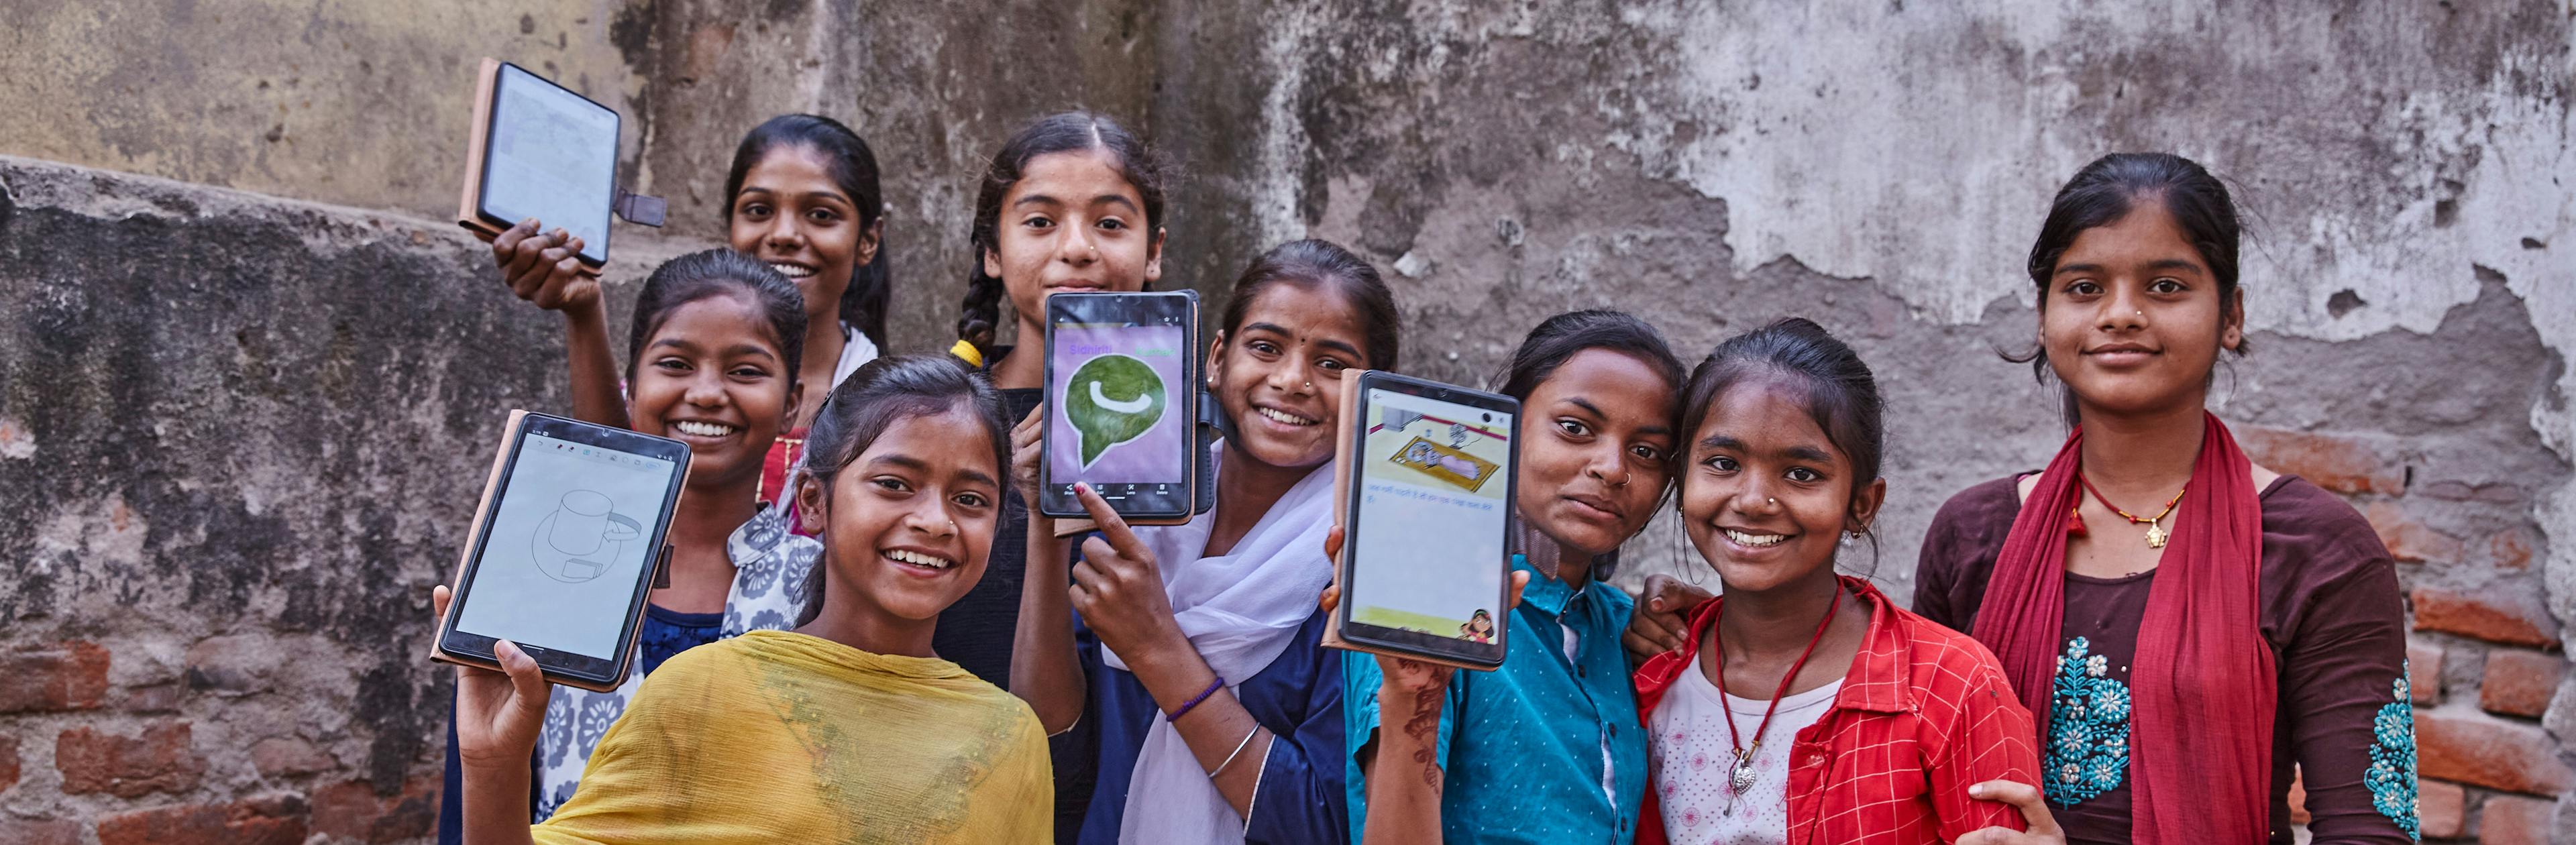 A group of girls in India holding tablets donated by UNICEF